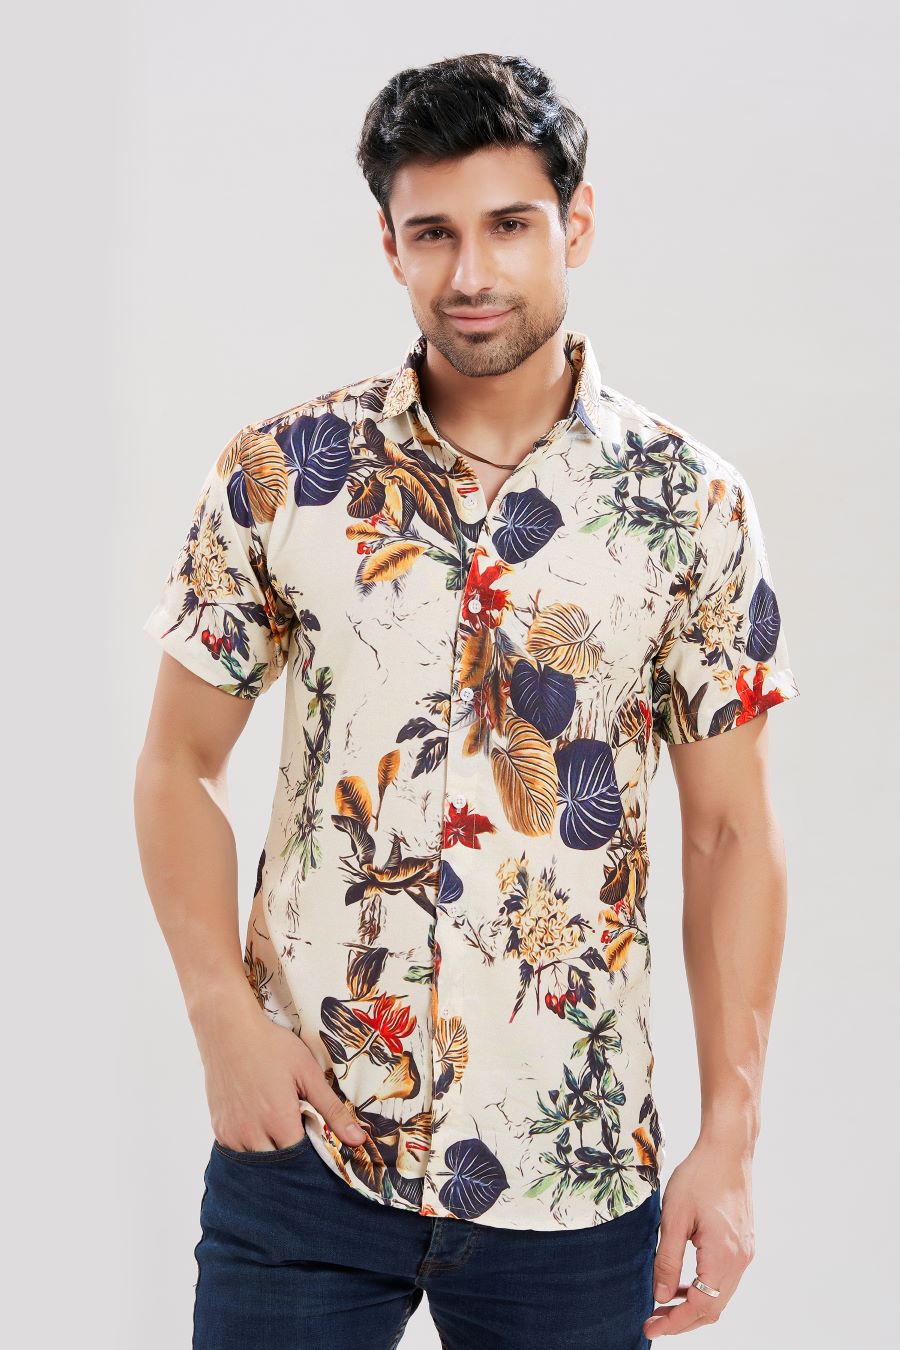 Orchid Print Multi-coloured Casual Shirt | Men's Printed Shirts ...